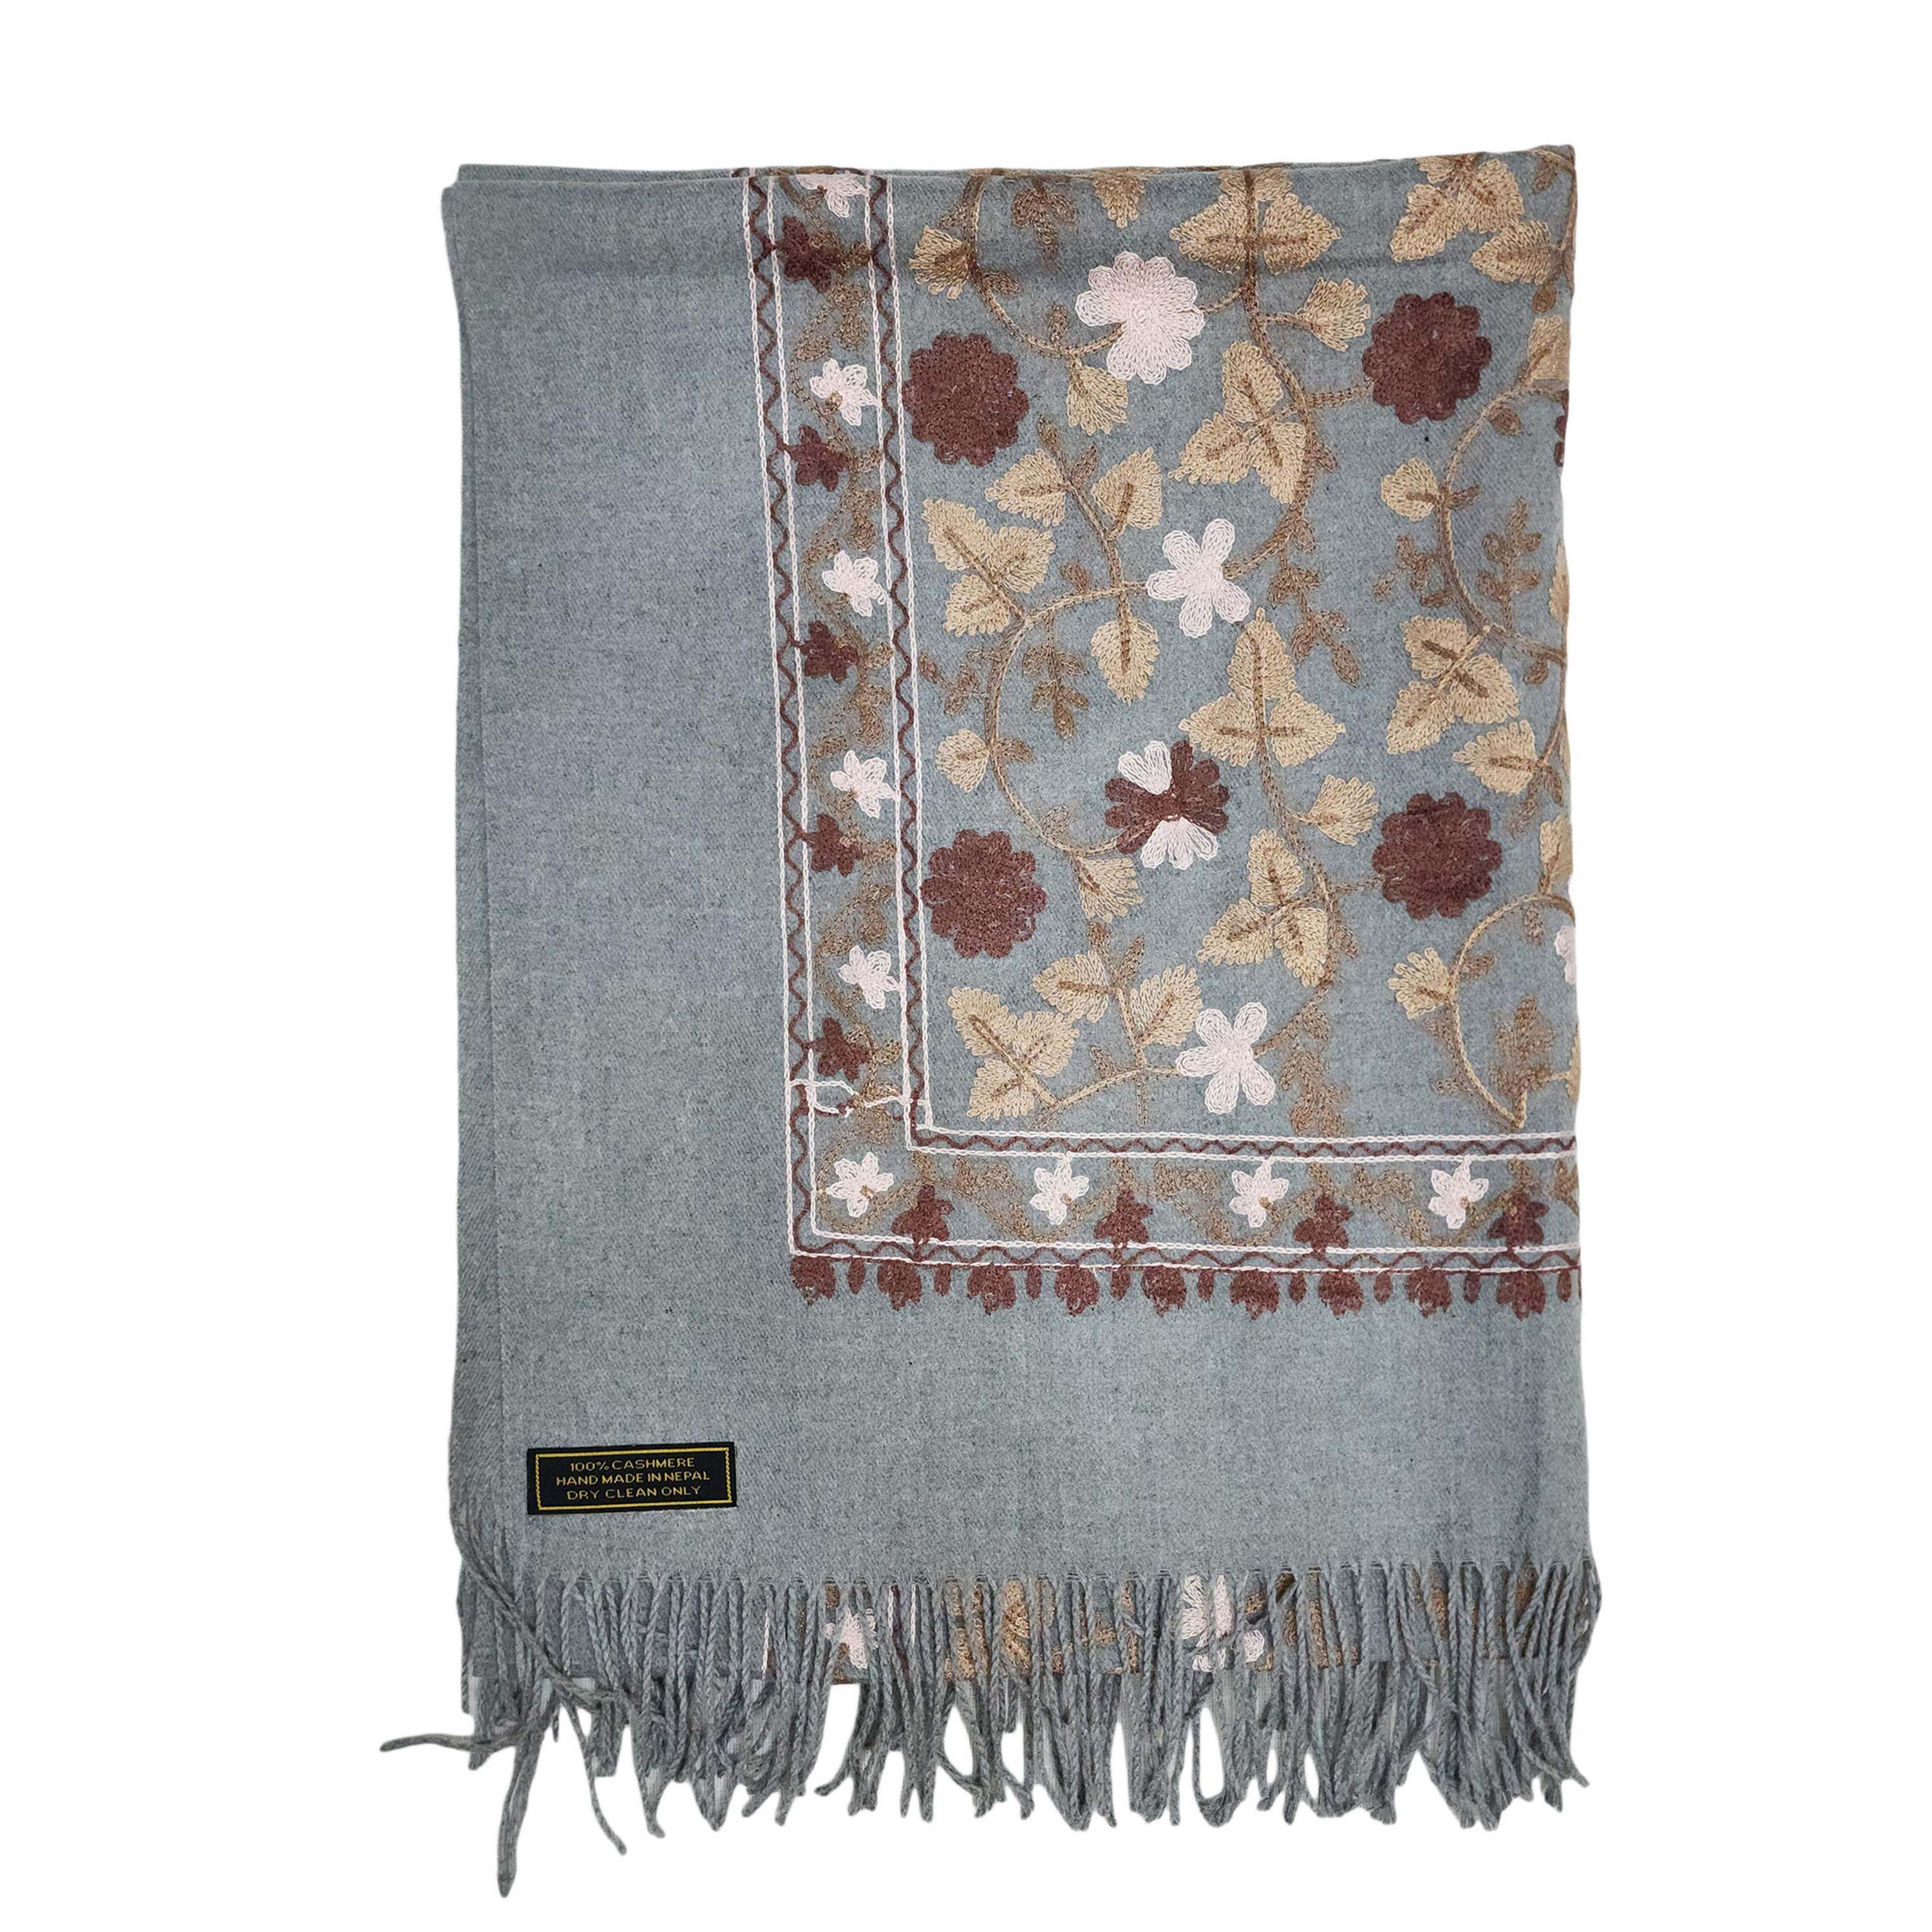 Desigener Shawl, Thick Nepali Shawl, With Heavy Embroidery, Color gray